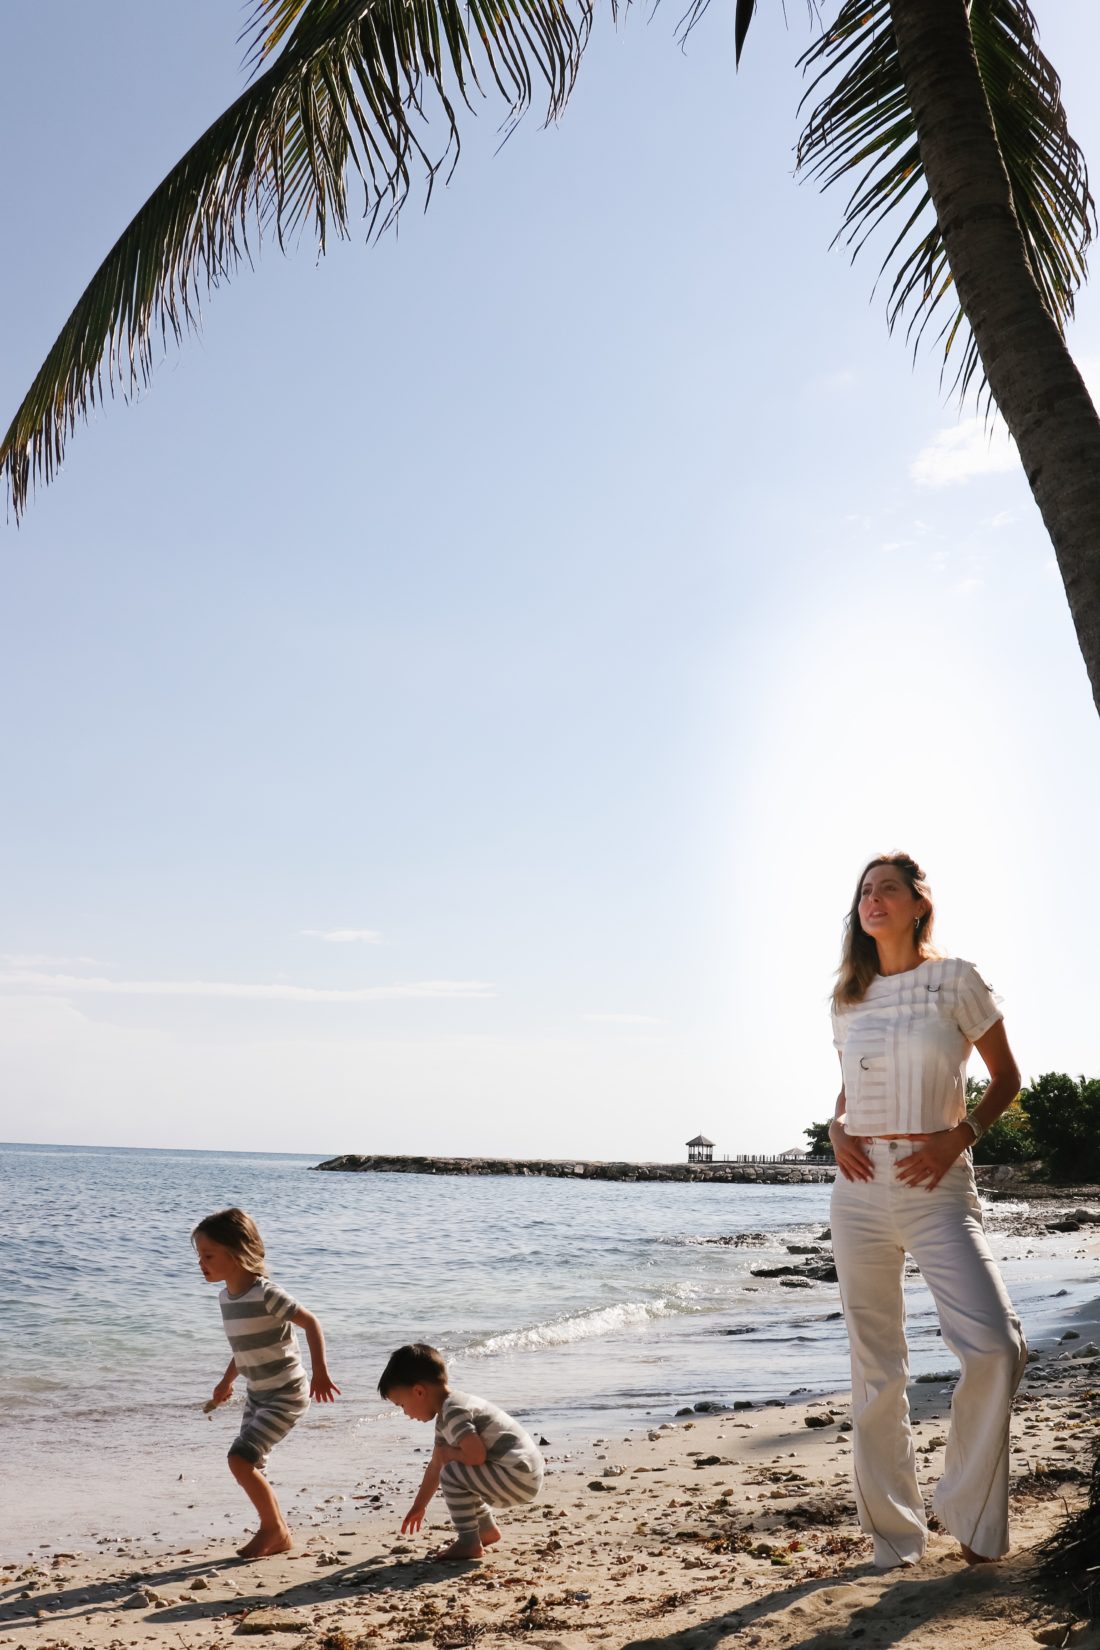 Eva Amurri Martino stands on the beach in Jamaica with her kids Marlowe and Major